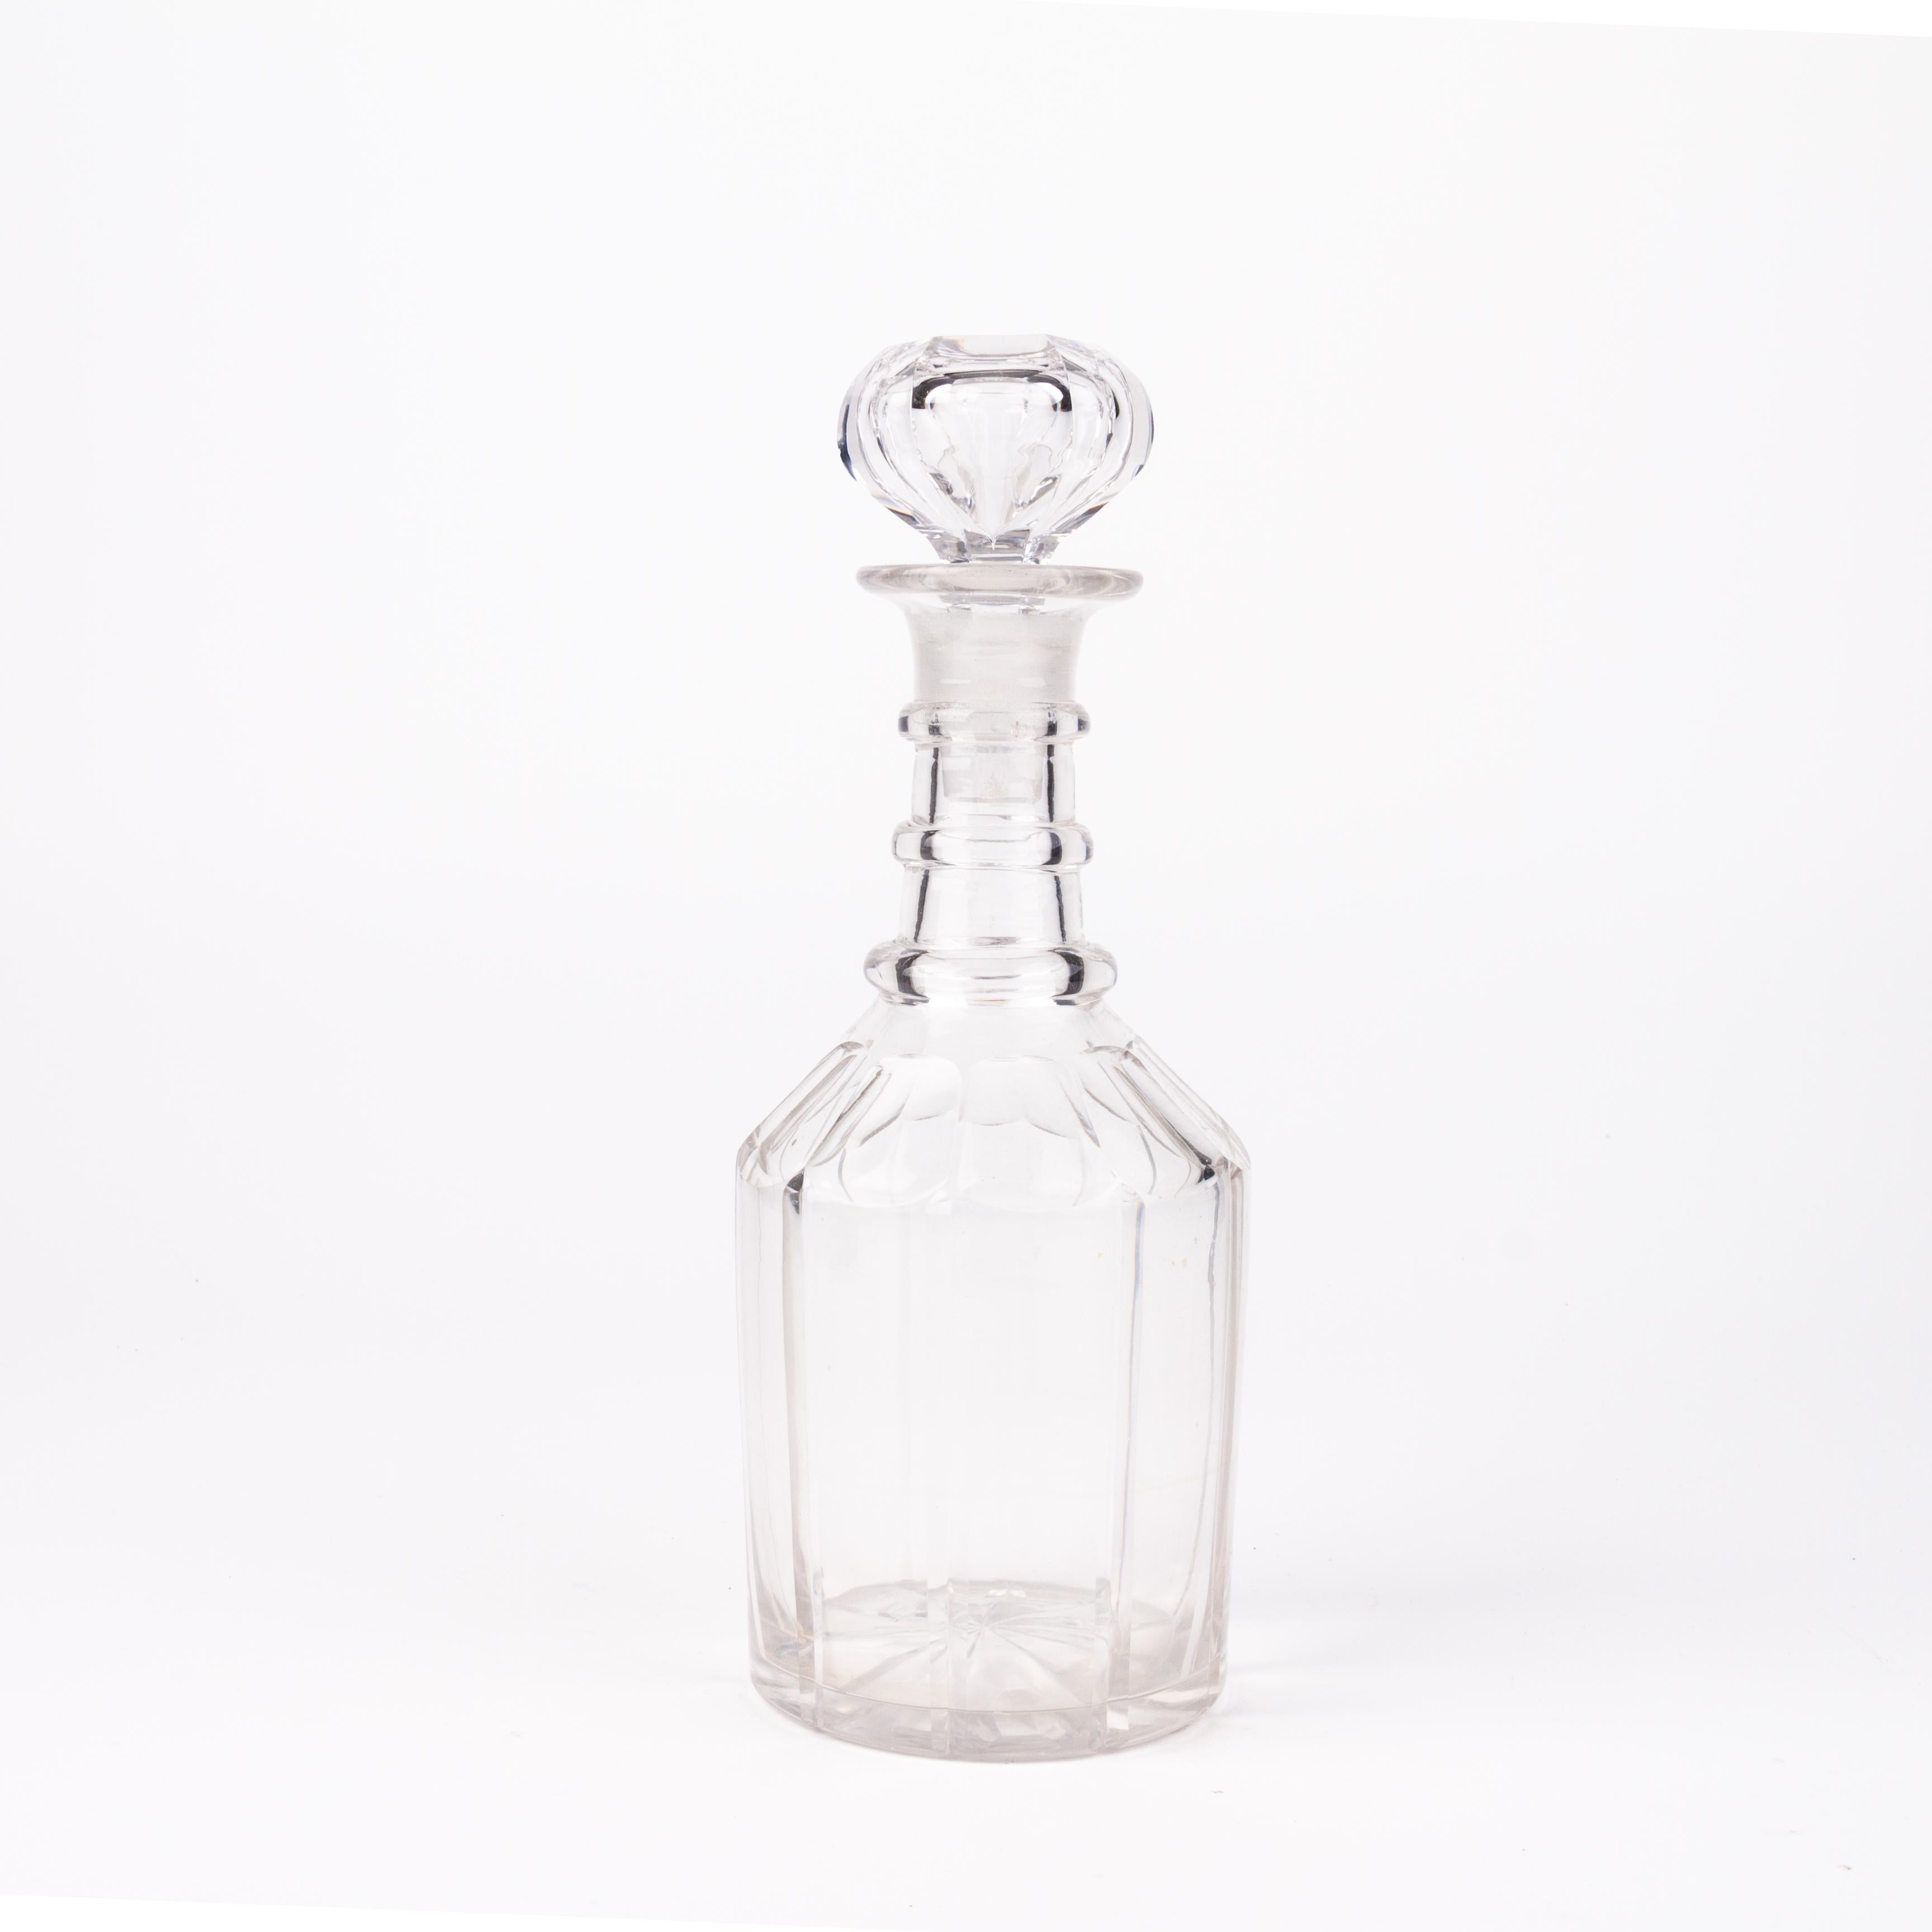 In good condition
From a private collection
Victorian Cut Crystal Glass Spirit Decanter Bottle 